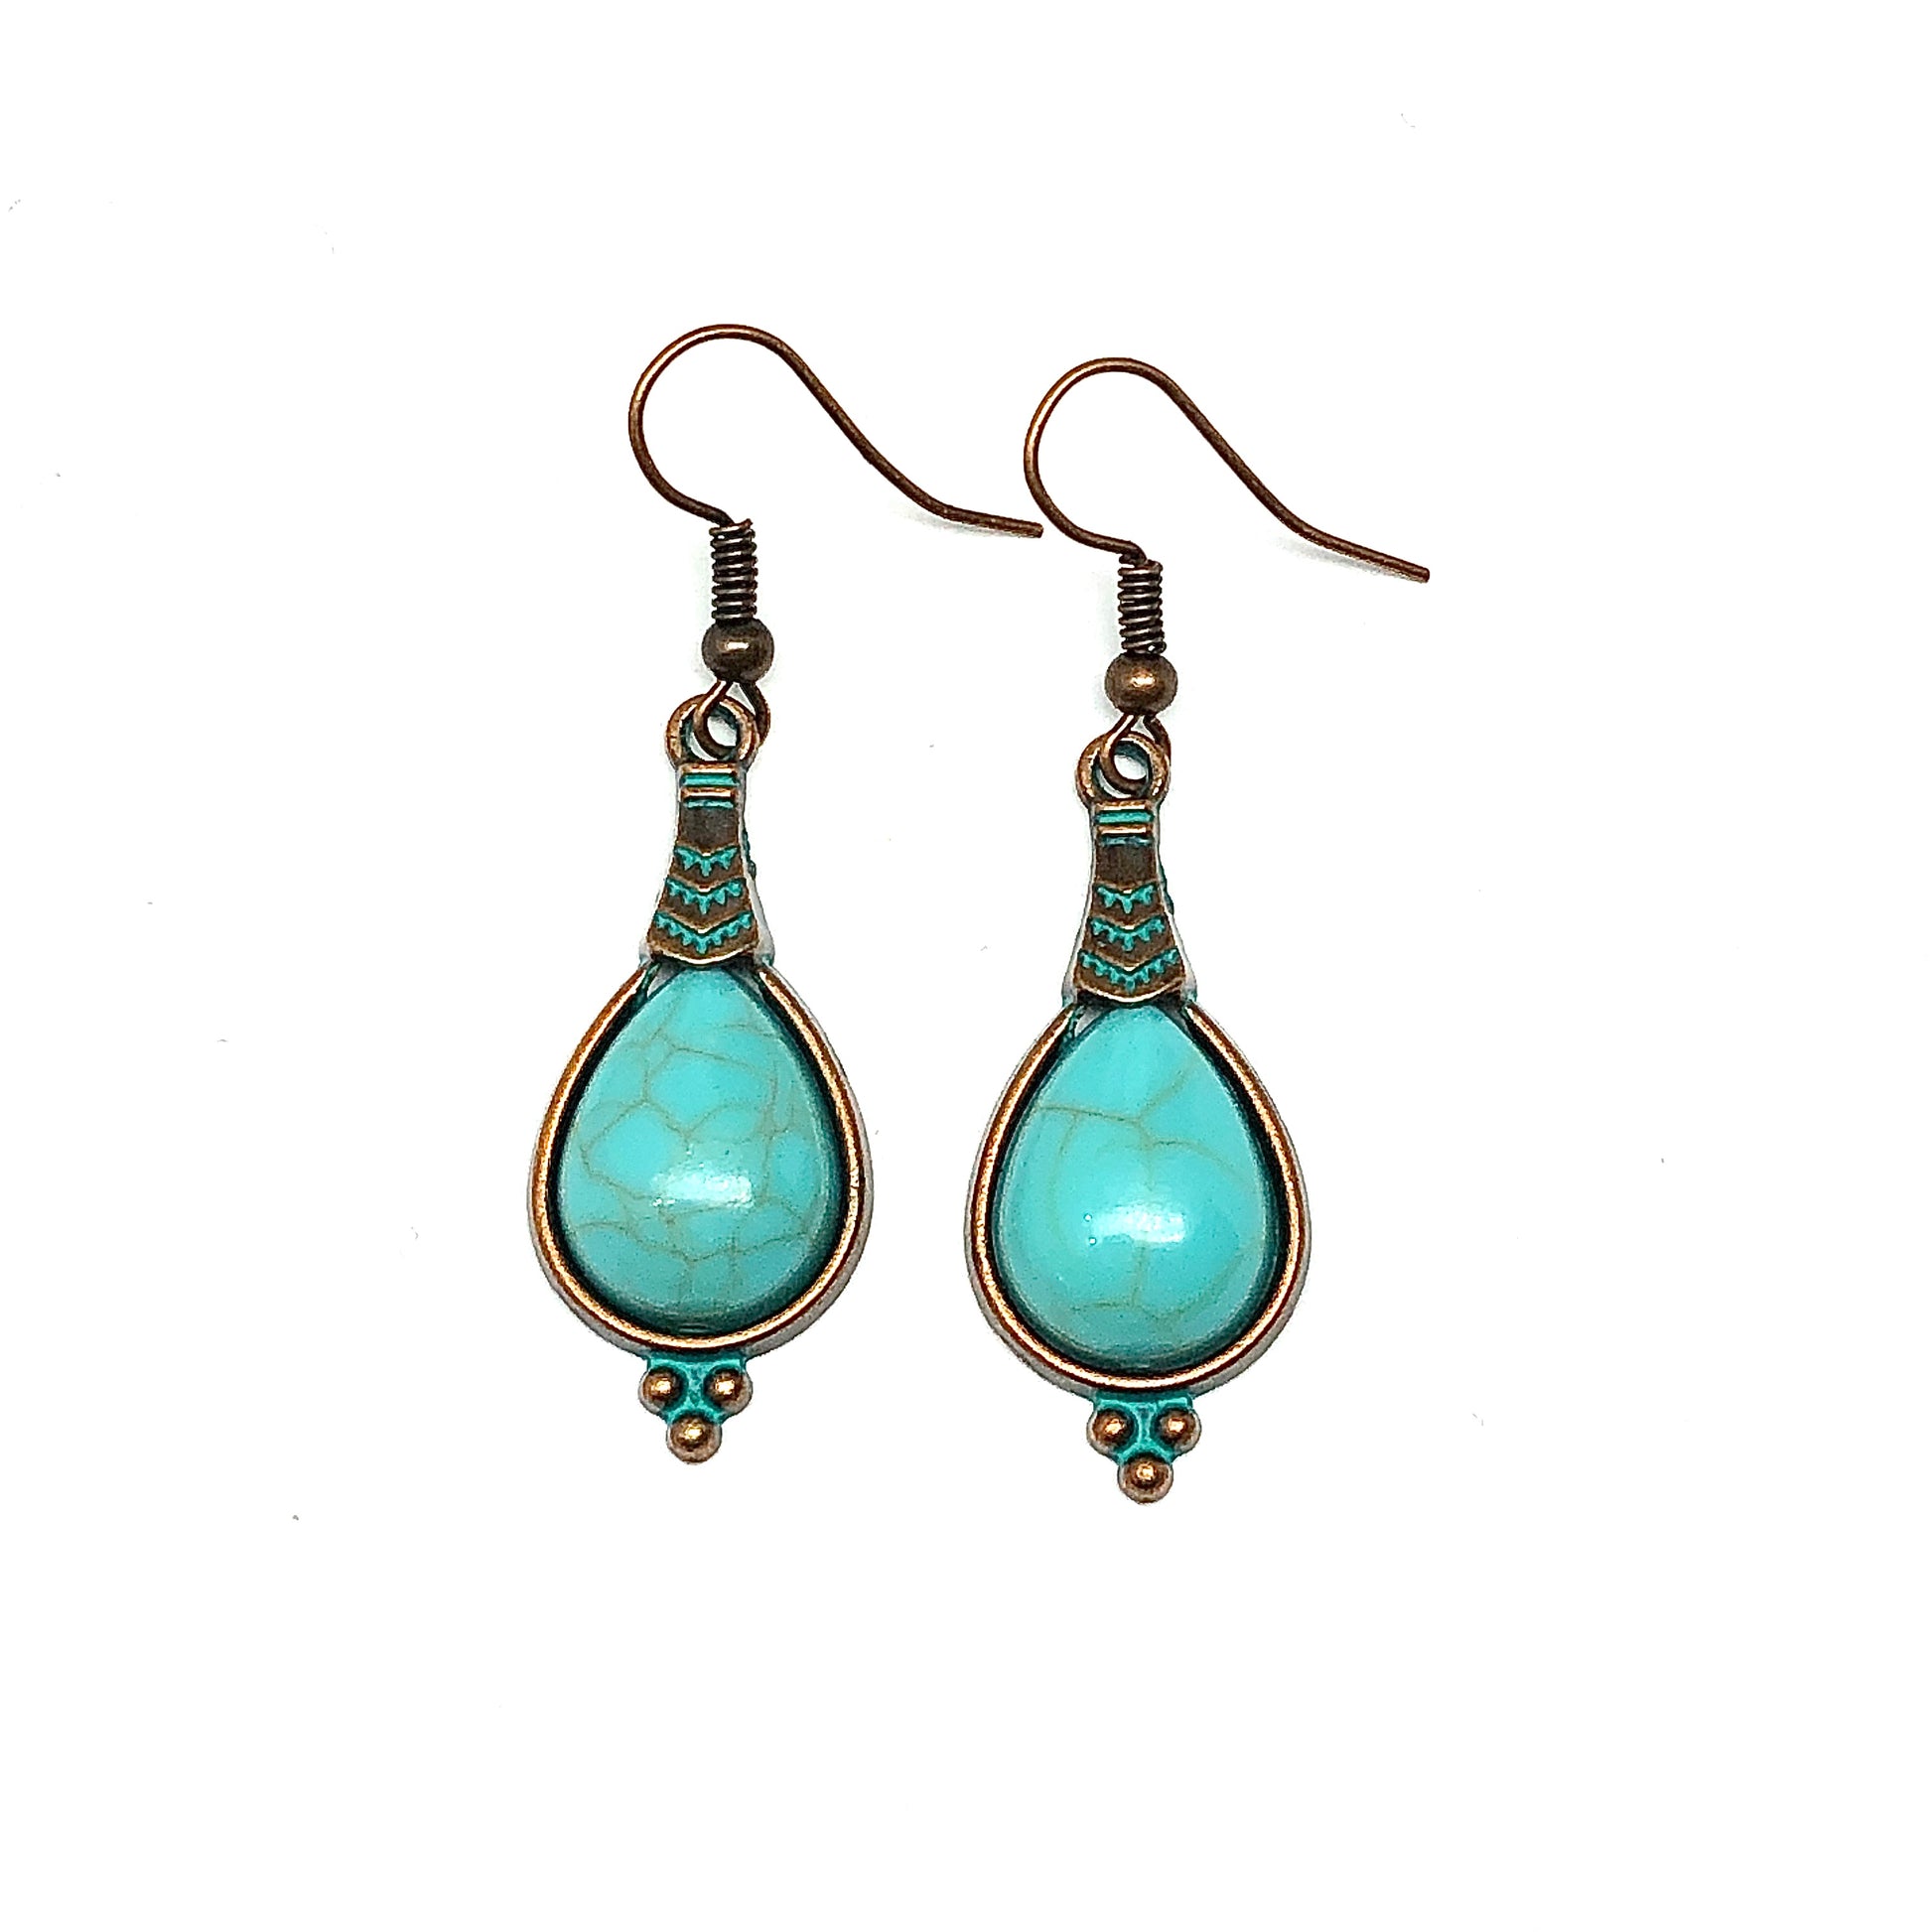 Rustic Bronzed Baby Blue Turquoise Teardrop Earrings | Boho Style to Country Girl Jewelry at Blingschlingers in USA